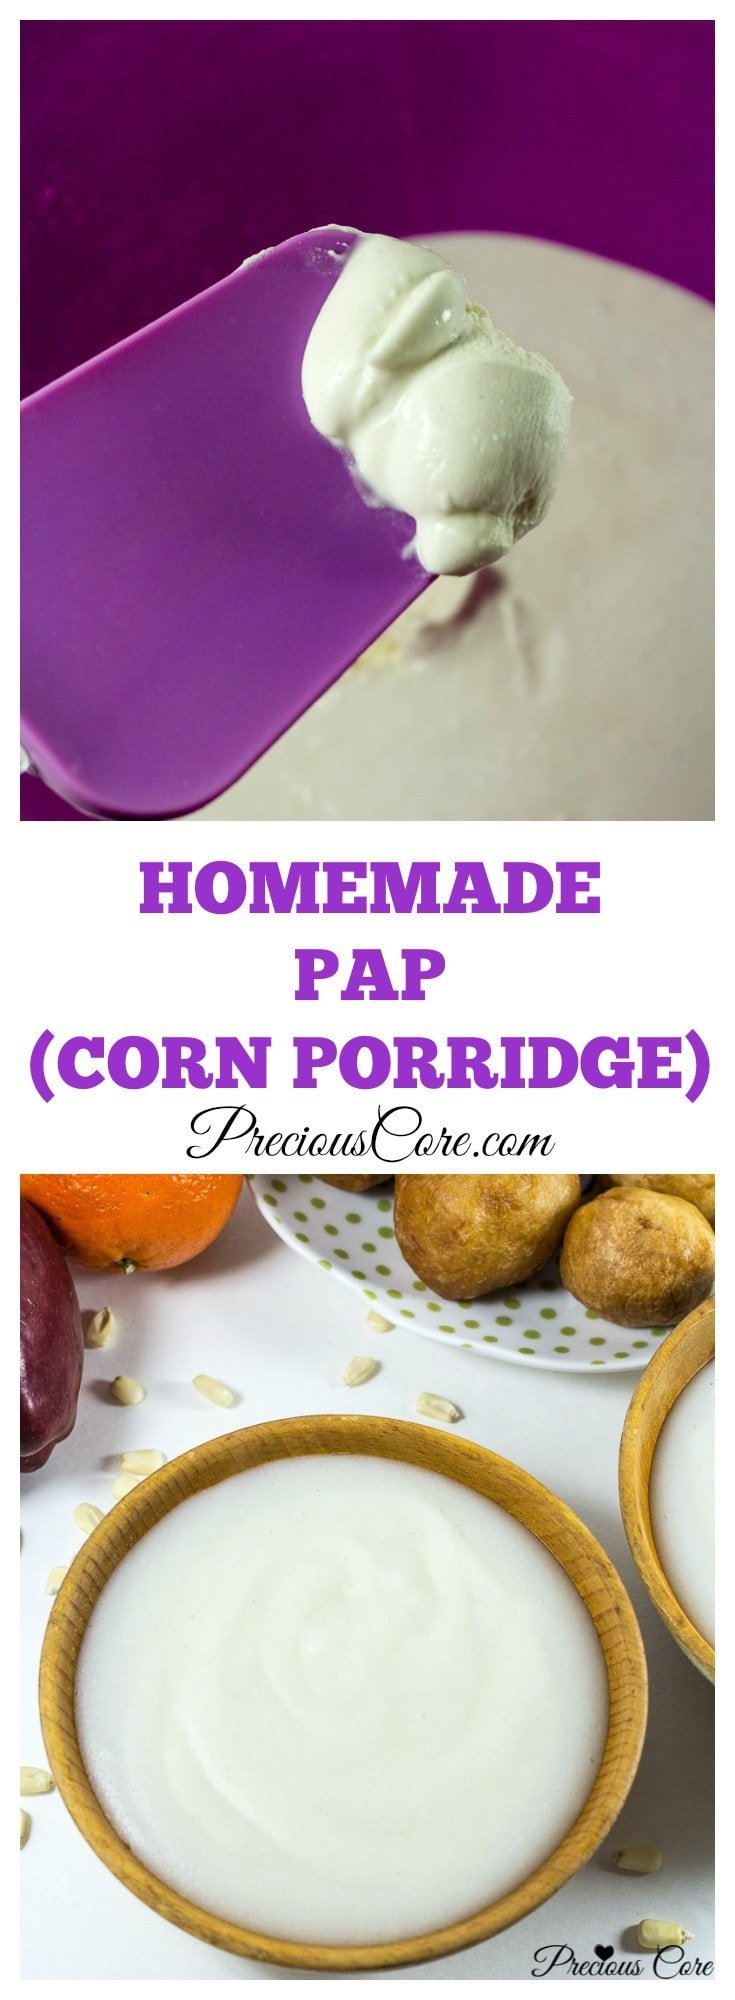 How to make pap from scratch! Pap is a corn porridge typically eaten in Cameroon and Nigeria. Instead of using whole corn as is traditionally used, I used corn flour in this recipe and the results are epic. It is authentic, slightly tangy and so comforting. I love having this for breakfast or a quick dinner.